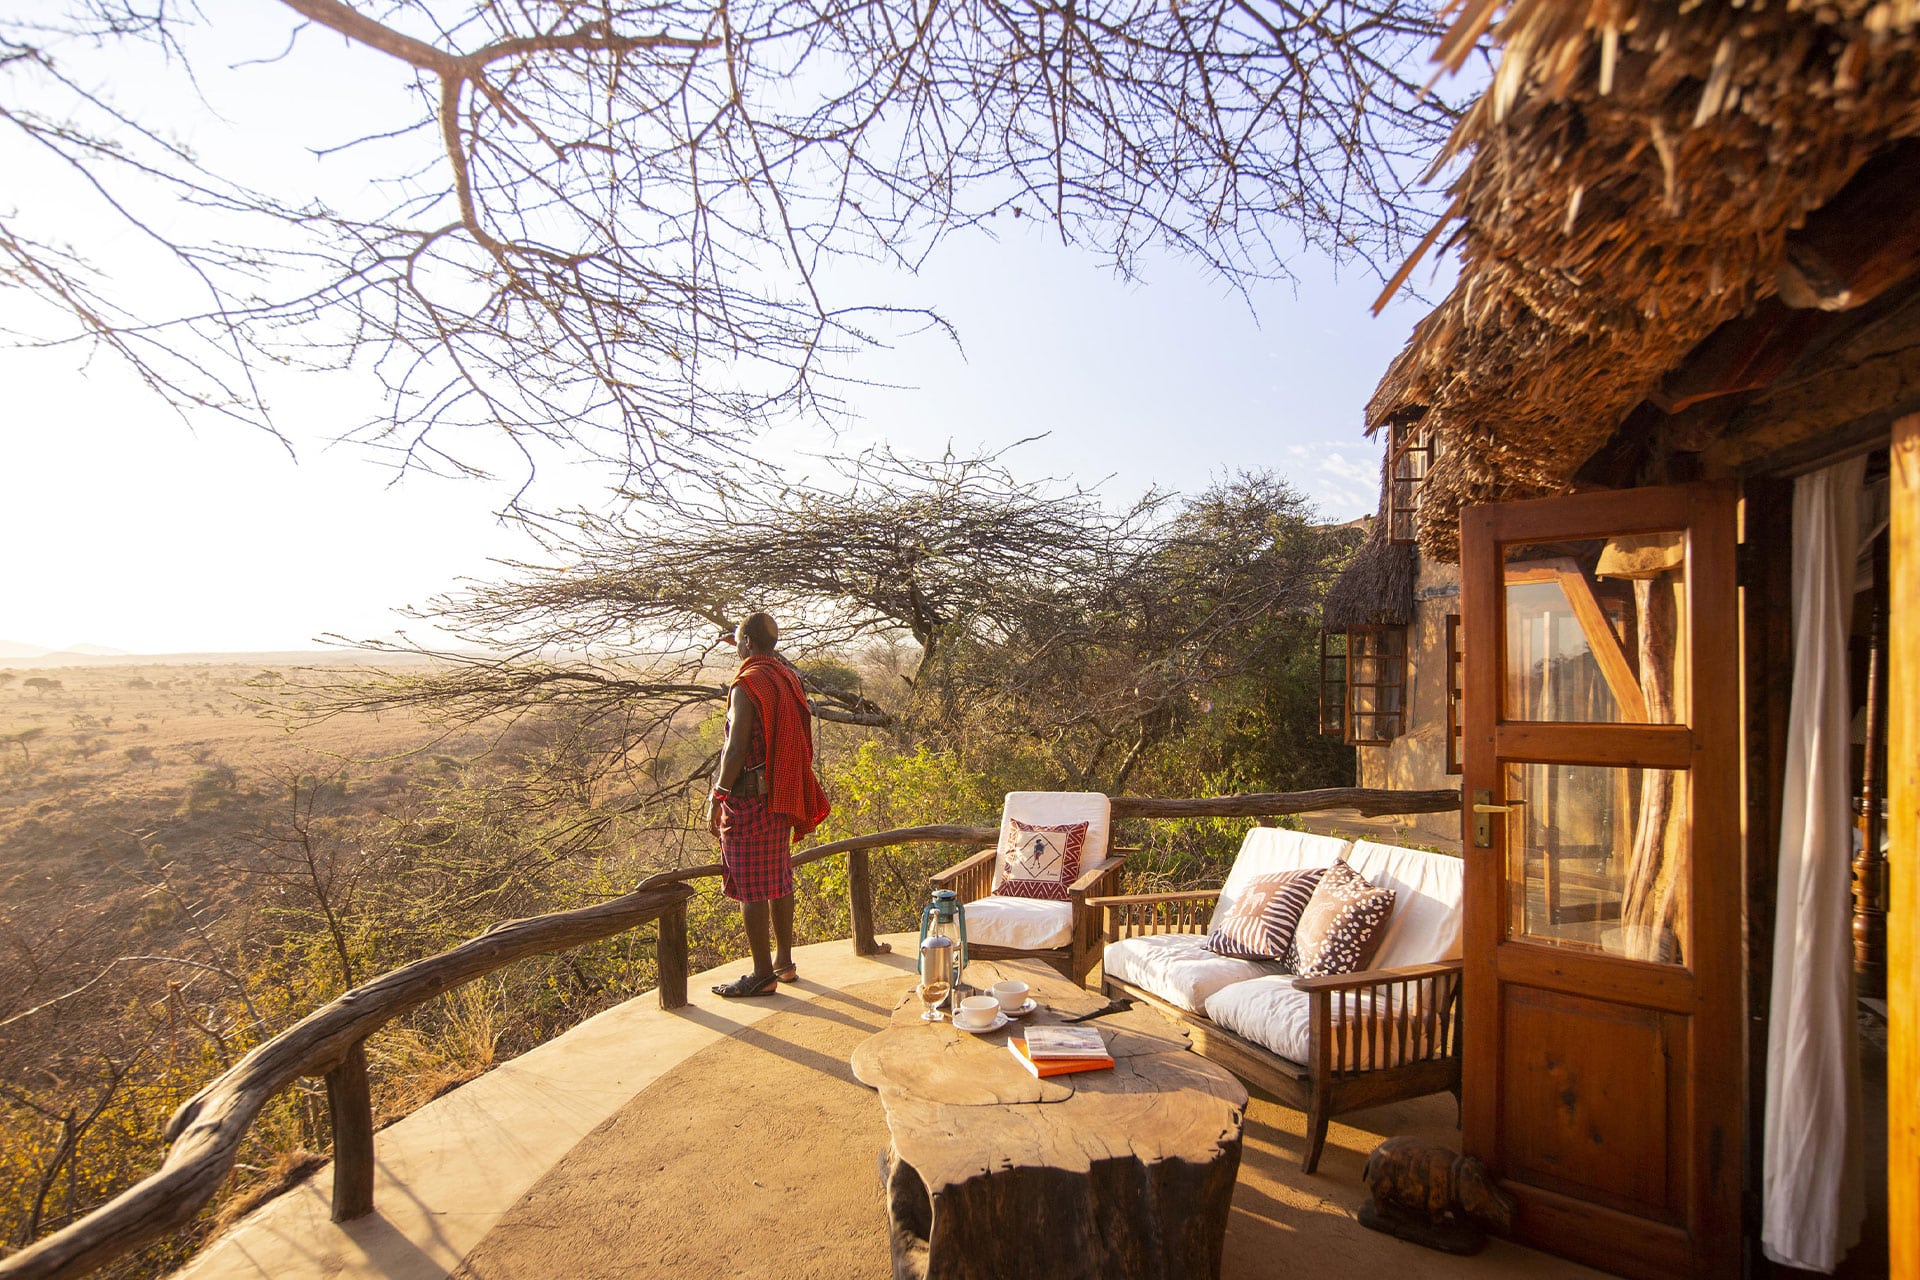 A Maasai man stands on the deck overlooking the bushveld at Lewa Wilderness